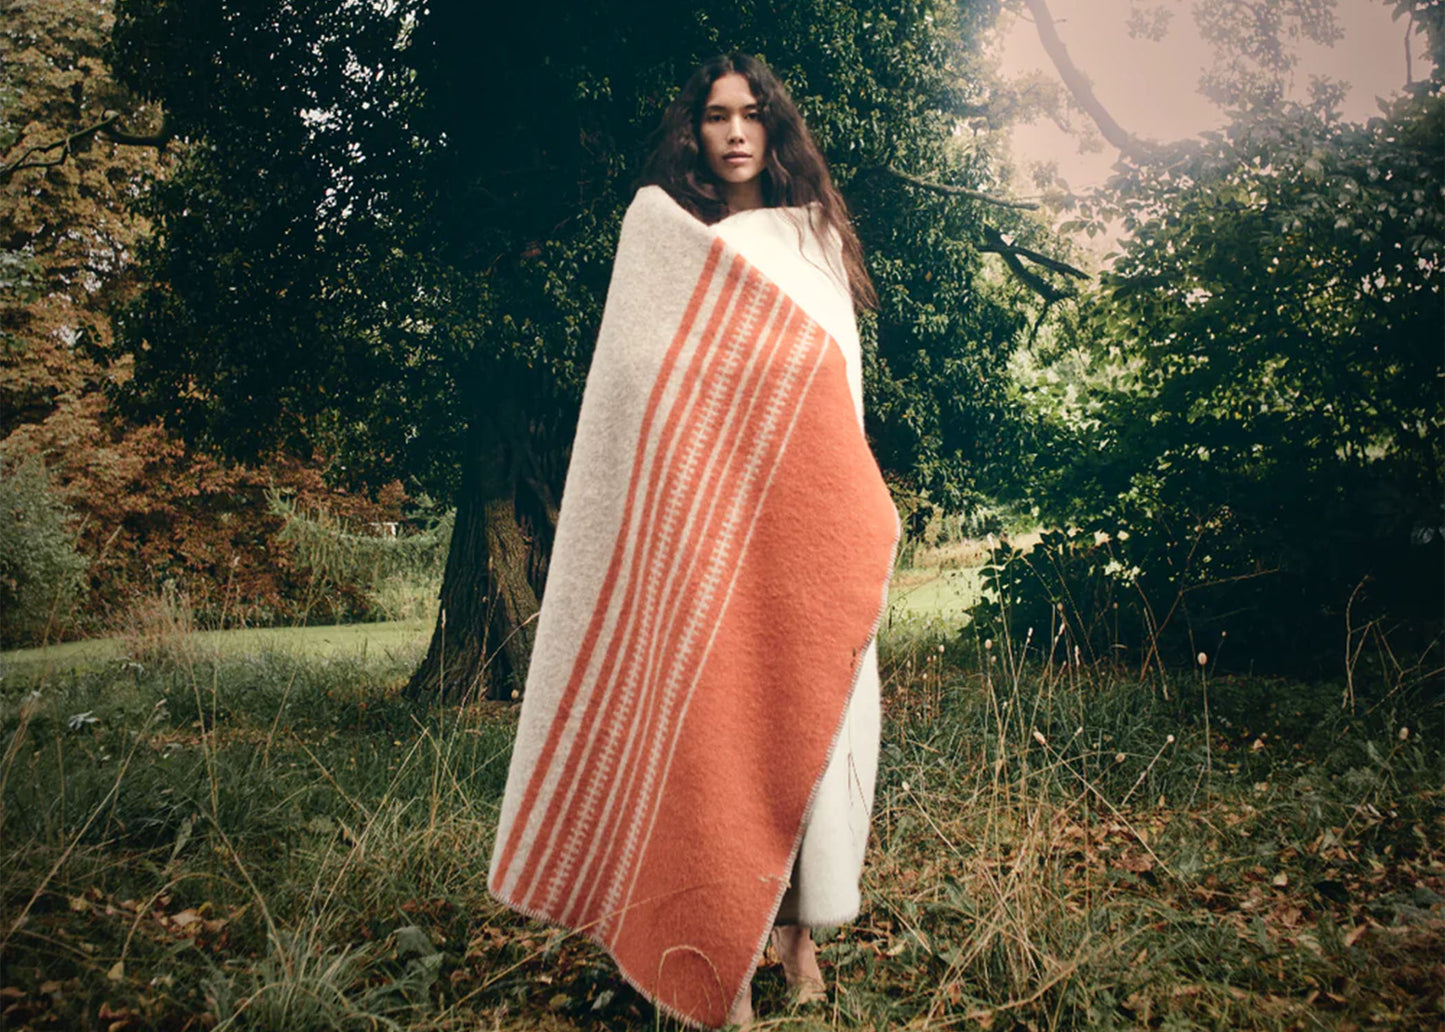 
                  
                    Aiyana no. 01 - Creme/Orange Blanket by Hein Studio wrapped around a model in nature
                  
                